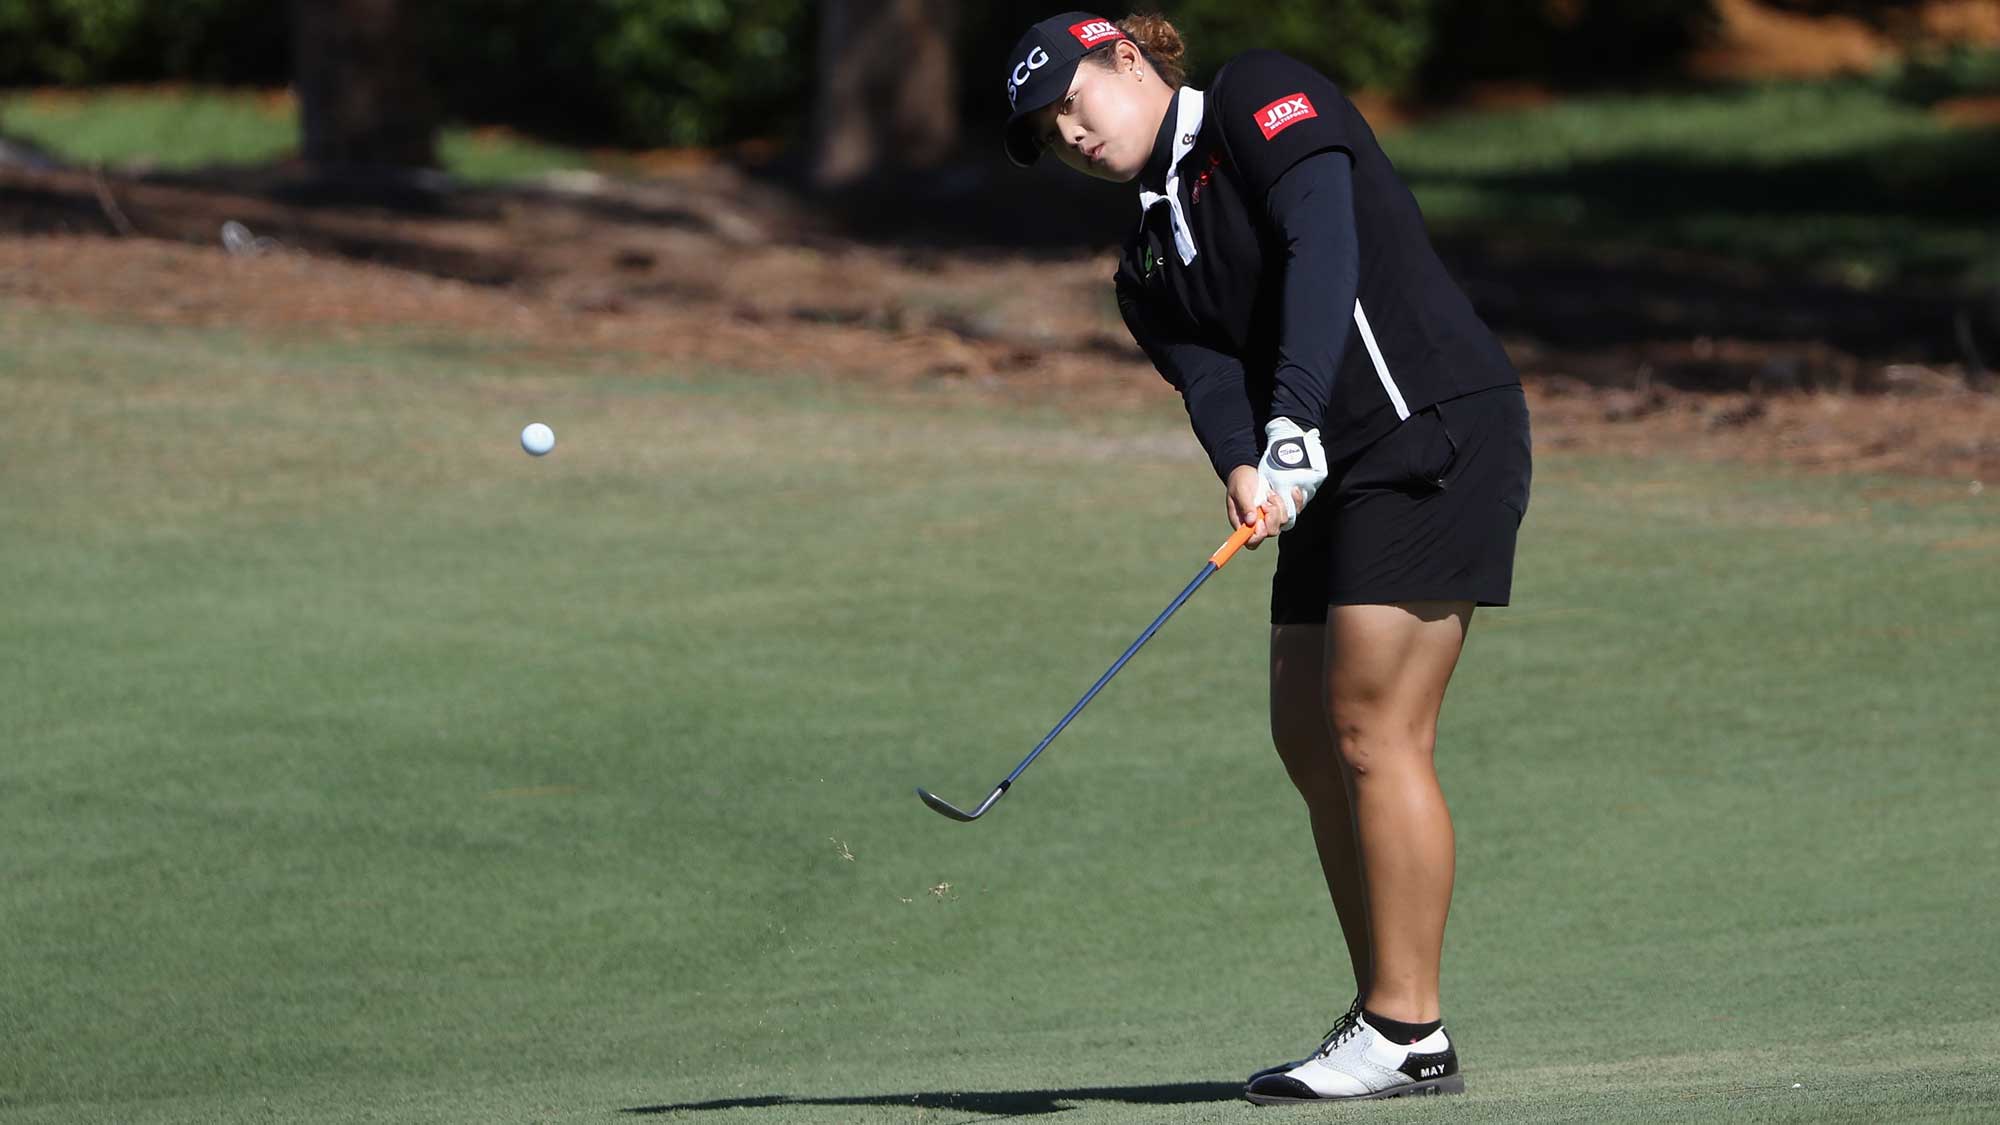 Ariya Jutanugarn of Thailand plays a shot on the sixth hole during the final round of the CME Group Tour Championship